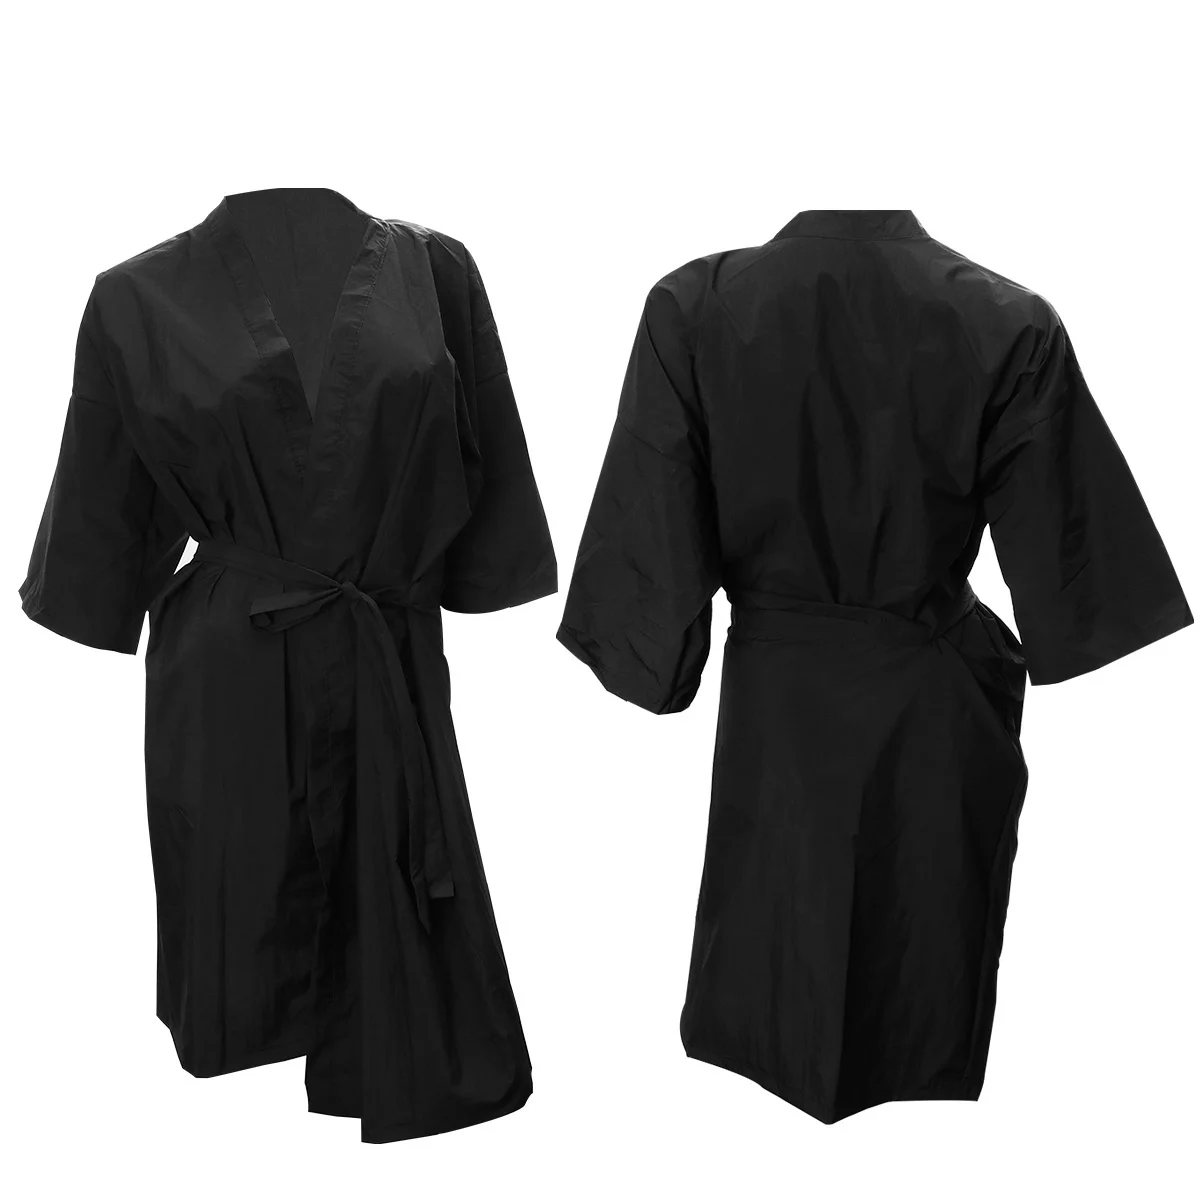 

Salon Cape Hair Robe Gown Client Smock Women Barber Capes Spa Bath Stylist Smocks Robes Kimono Uniform Gowns Dressing Styling